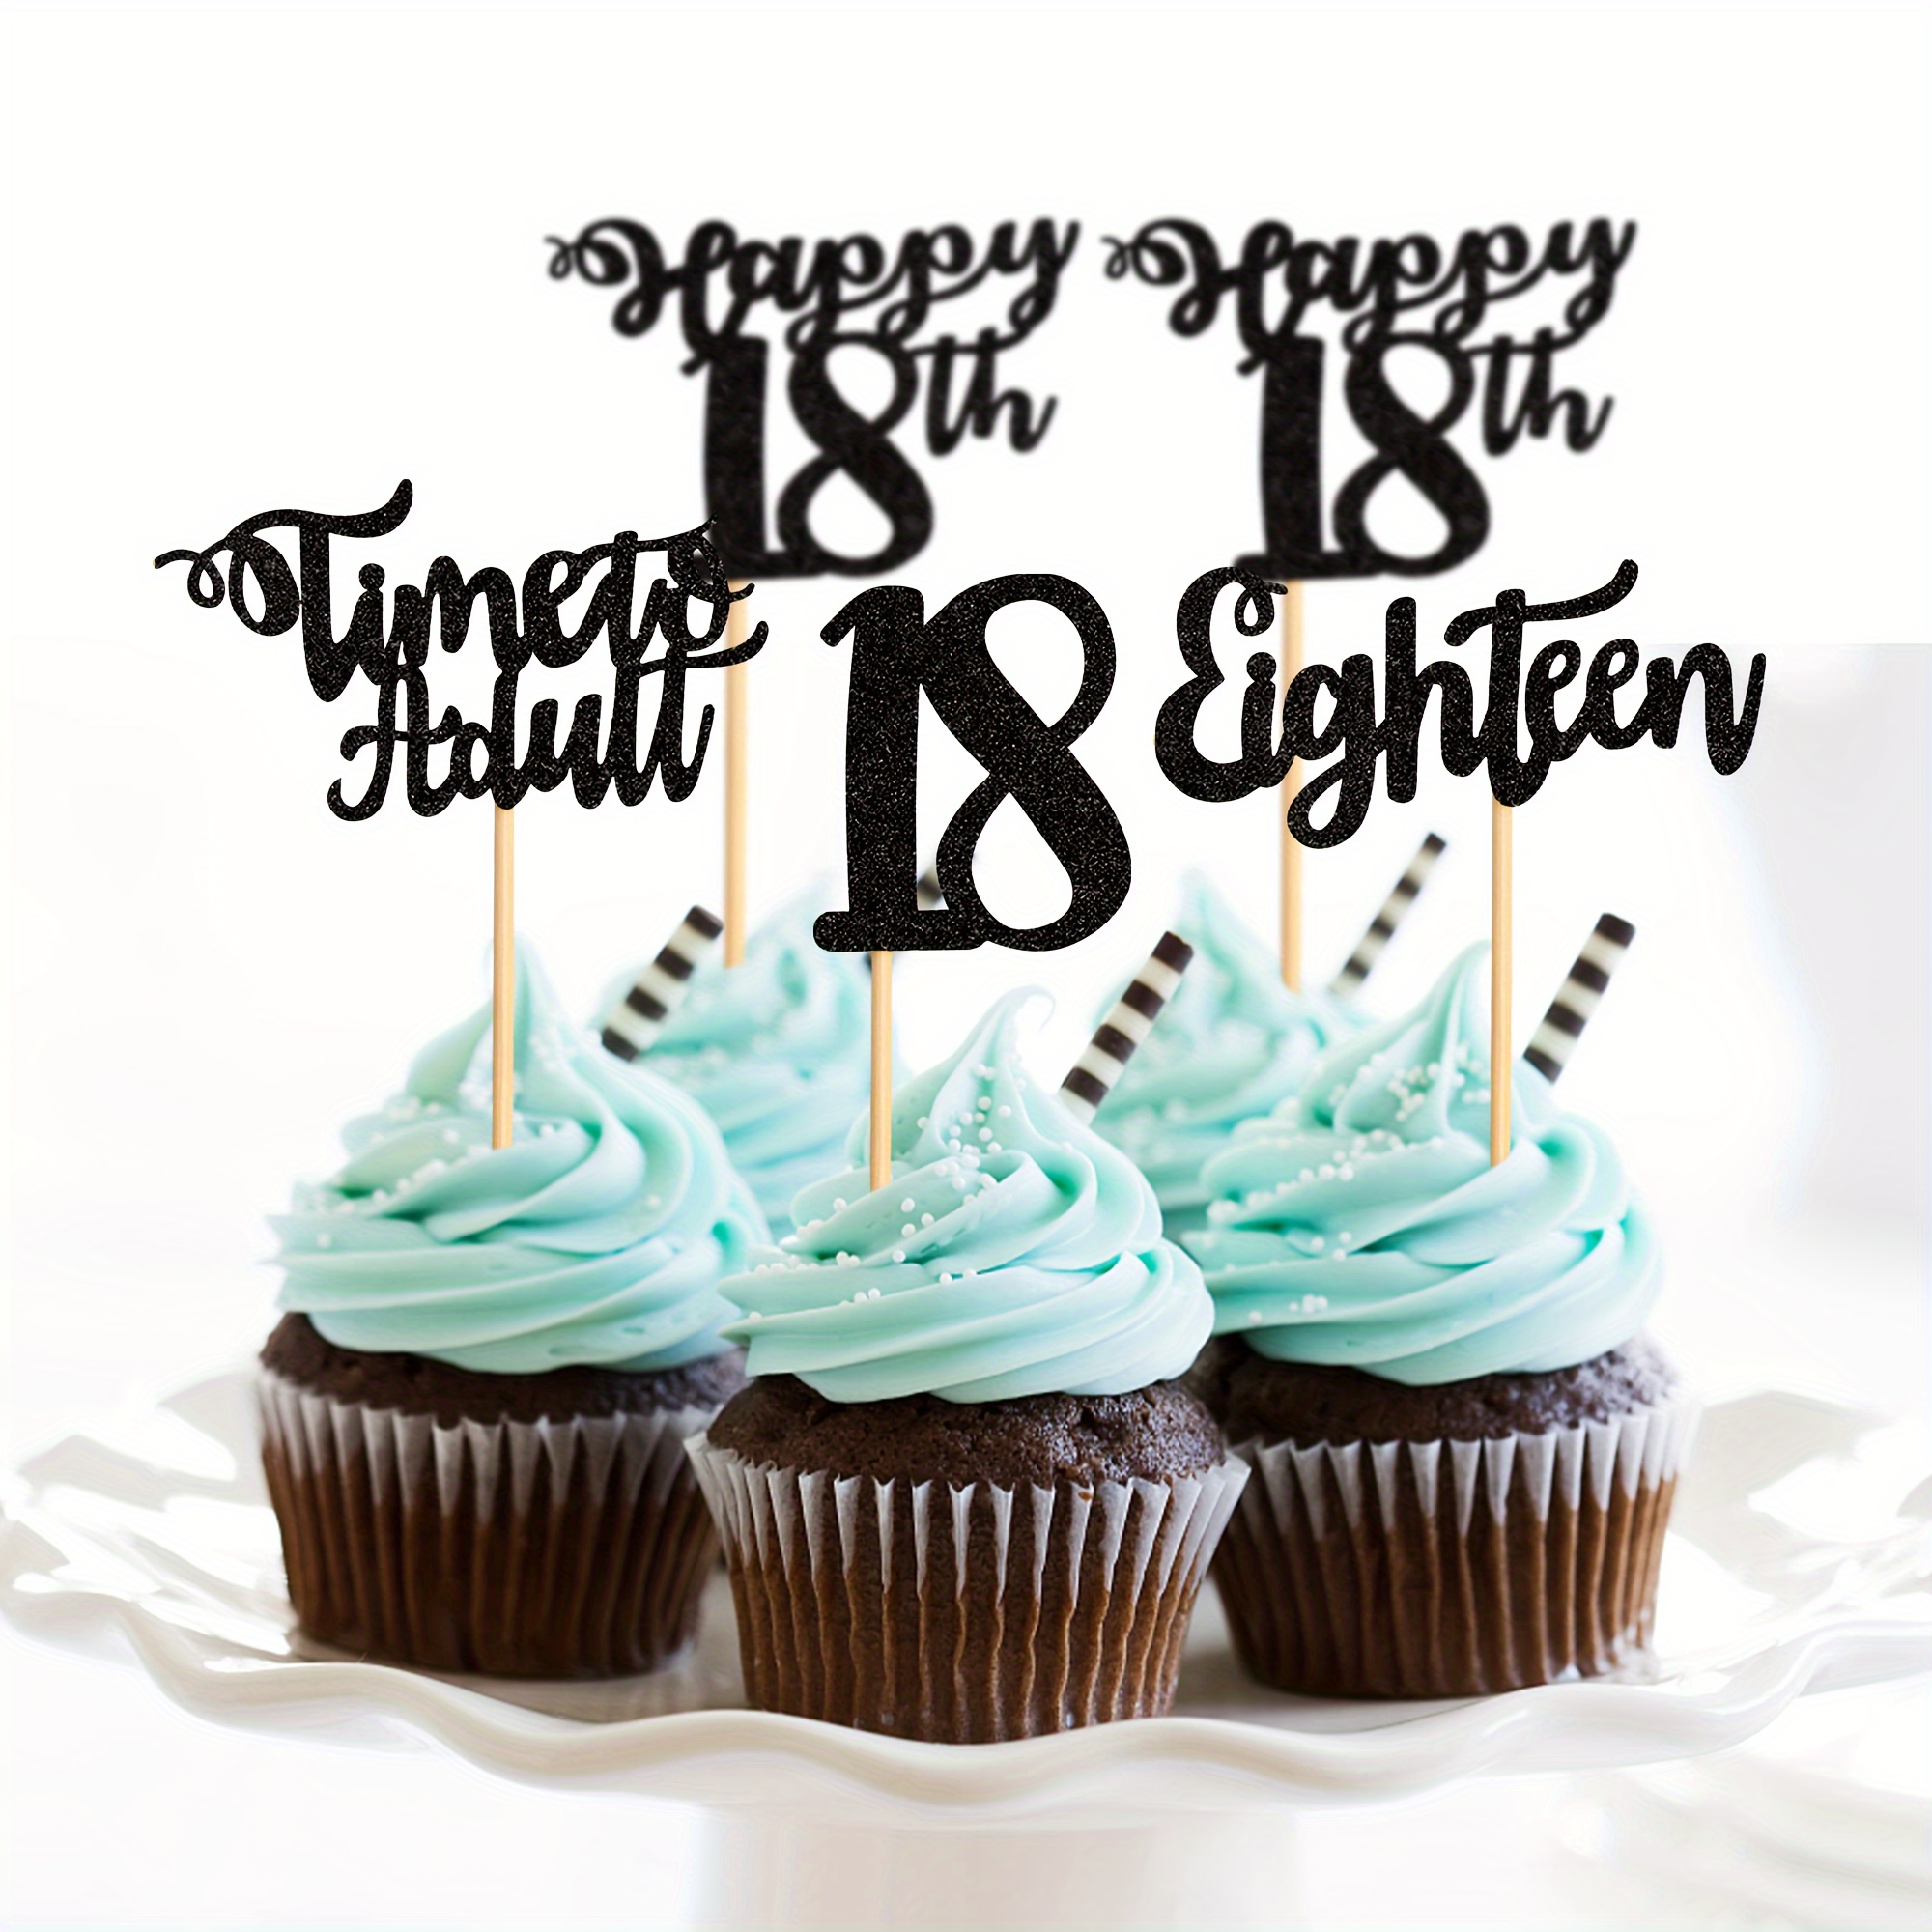 

12pcs Elegant Black Glitter 18th Birthday Cake Toppers, Paper Happy 18 Celebration Cake Decor, Adult Party Table Decorations, Cupcake Picks For All Seasons - No Electricity Or Battery Needed